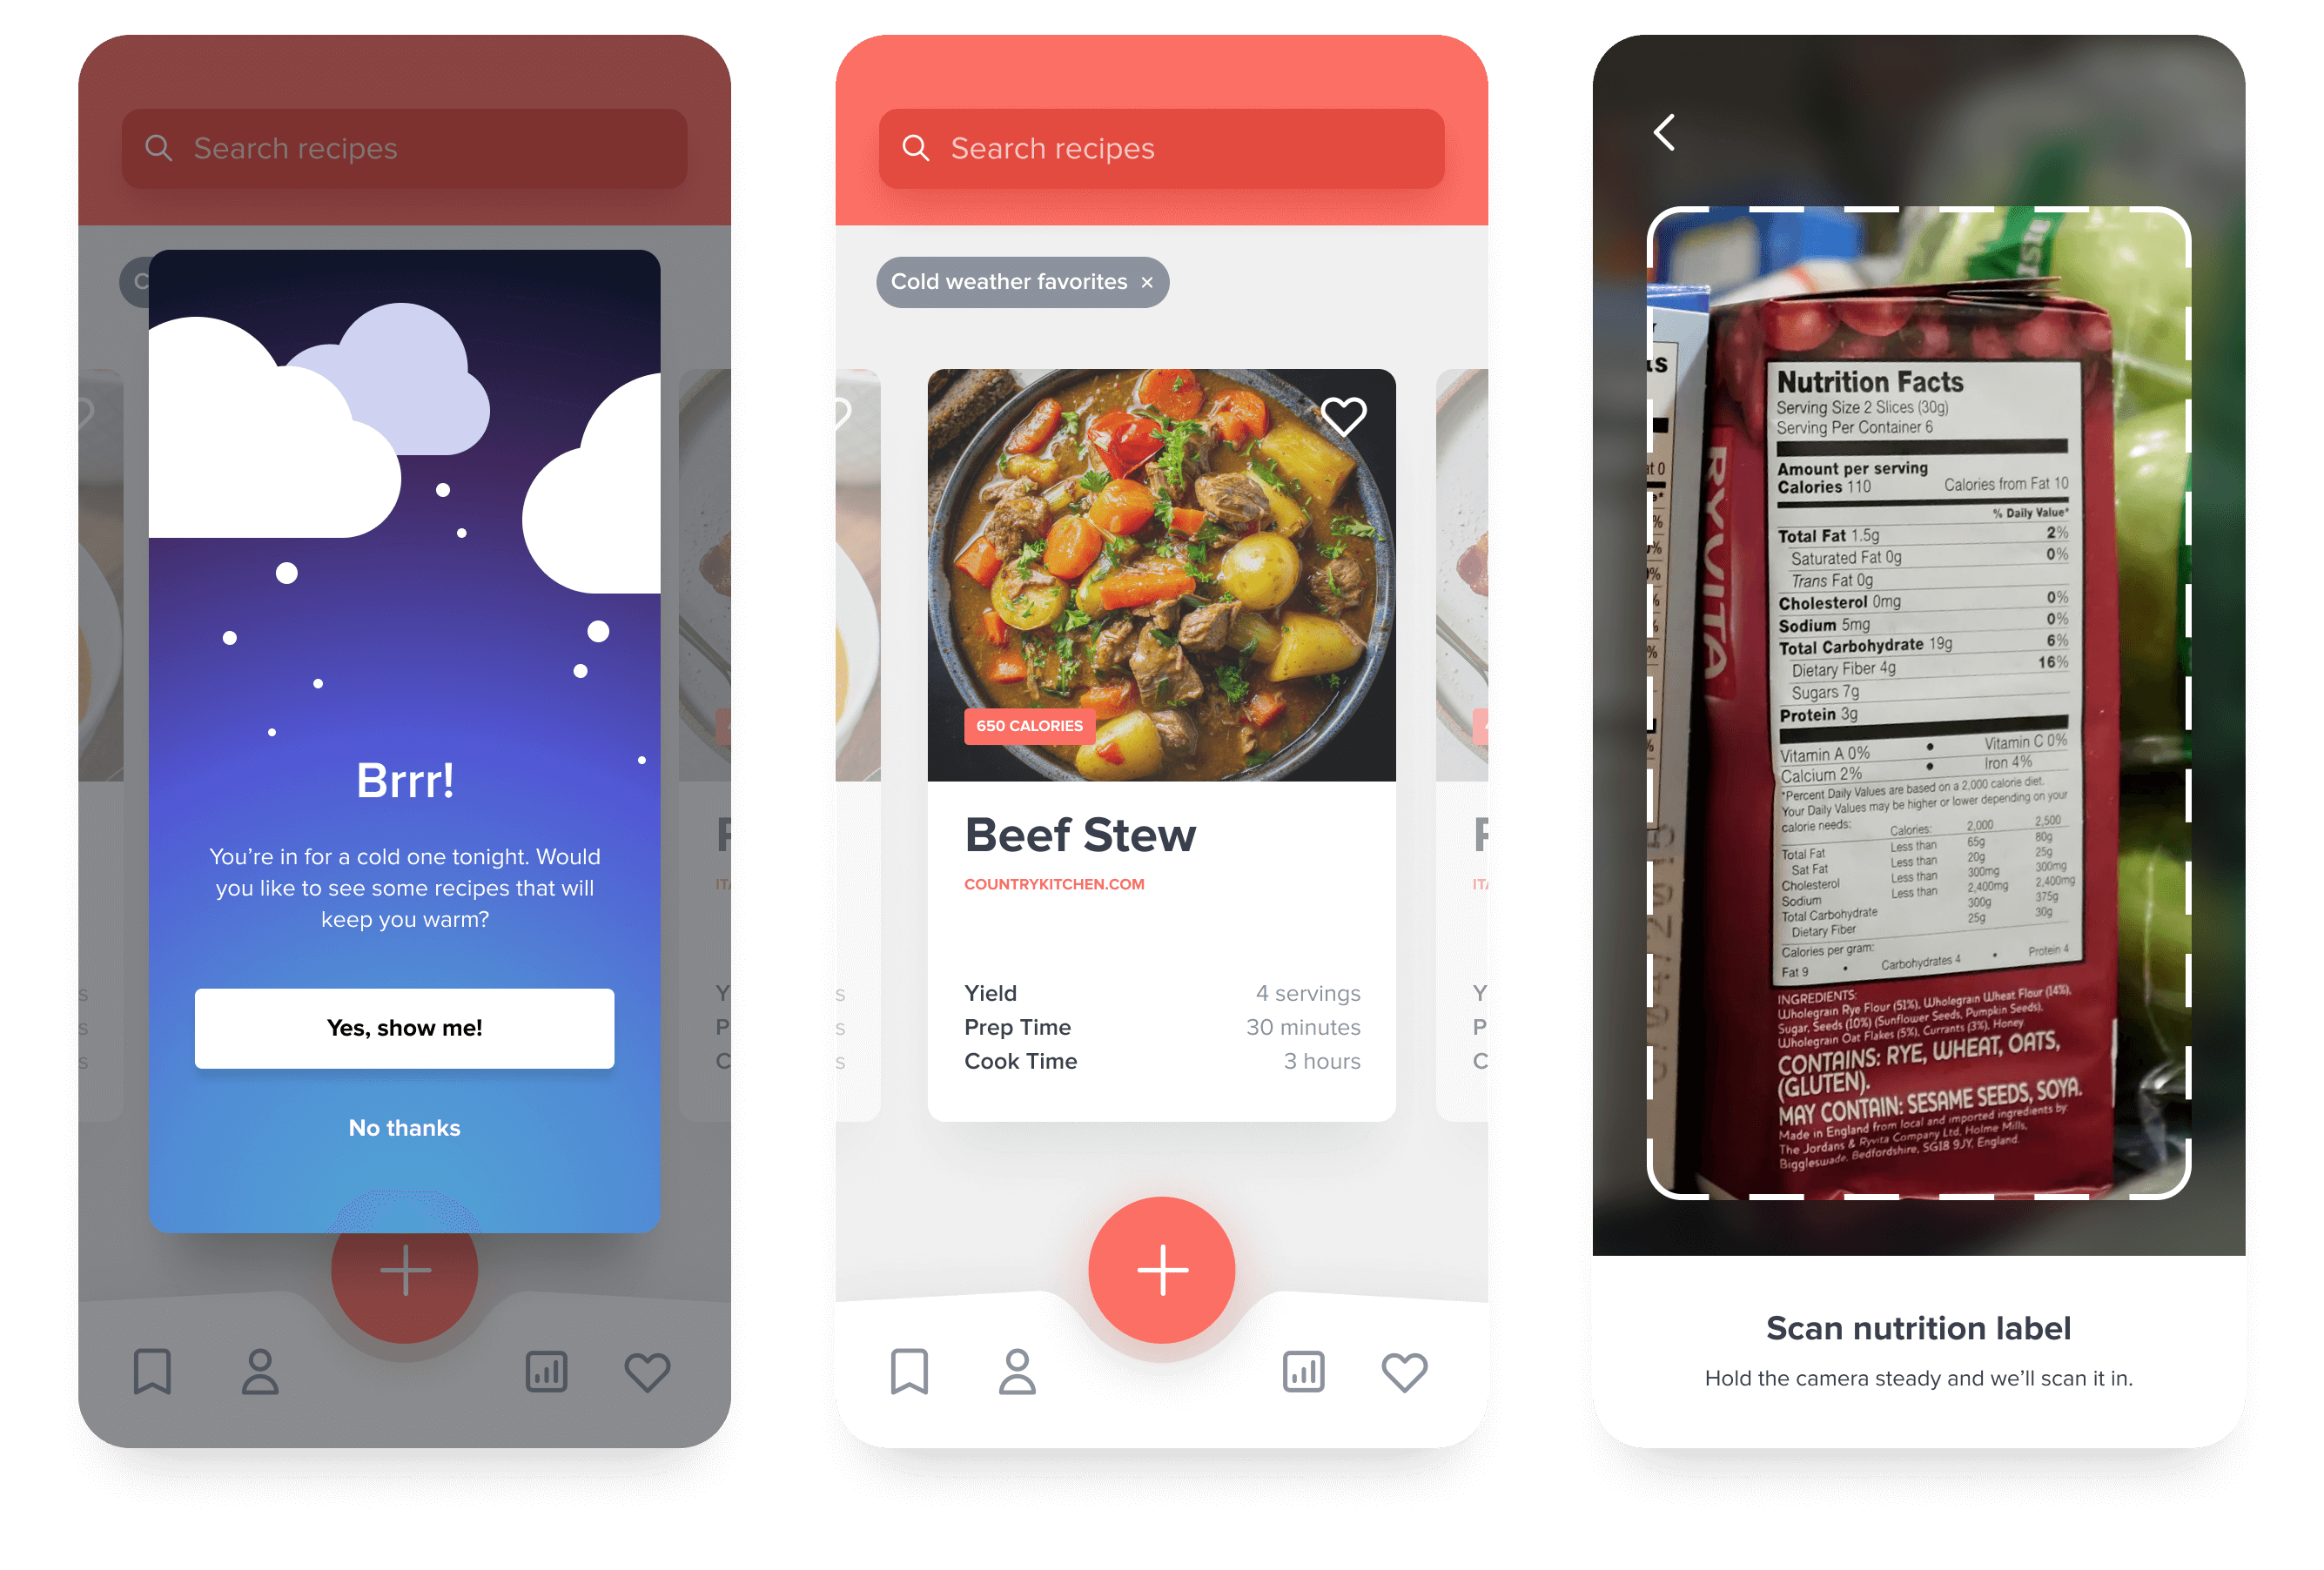 An app that recommends recipes based on weather patterns and other data.